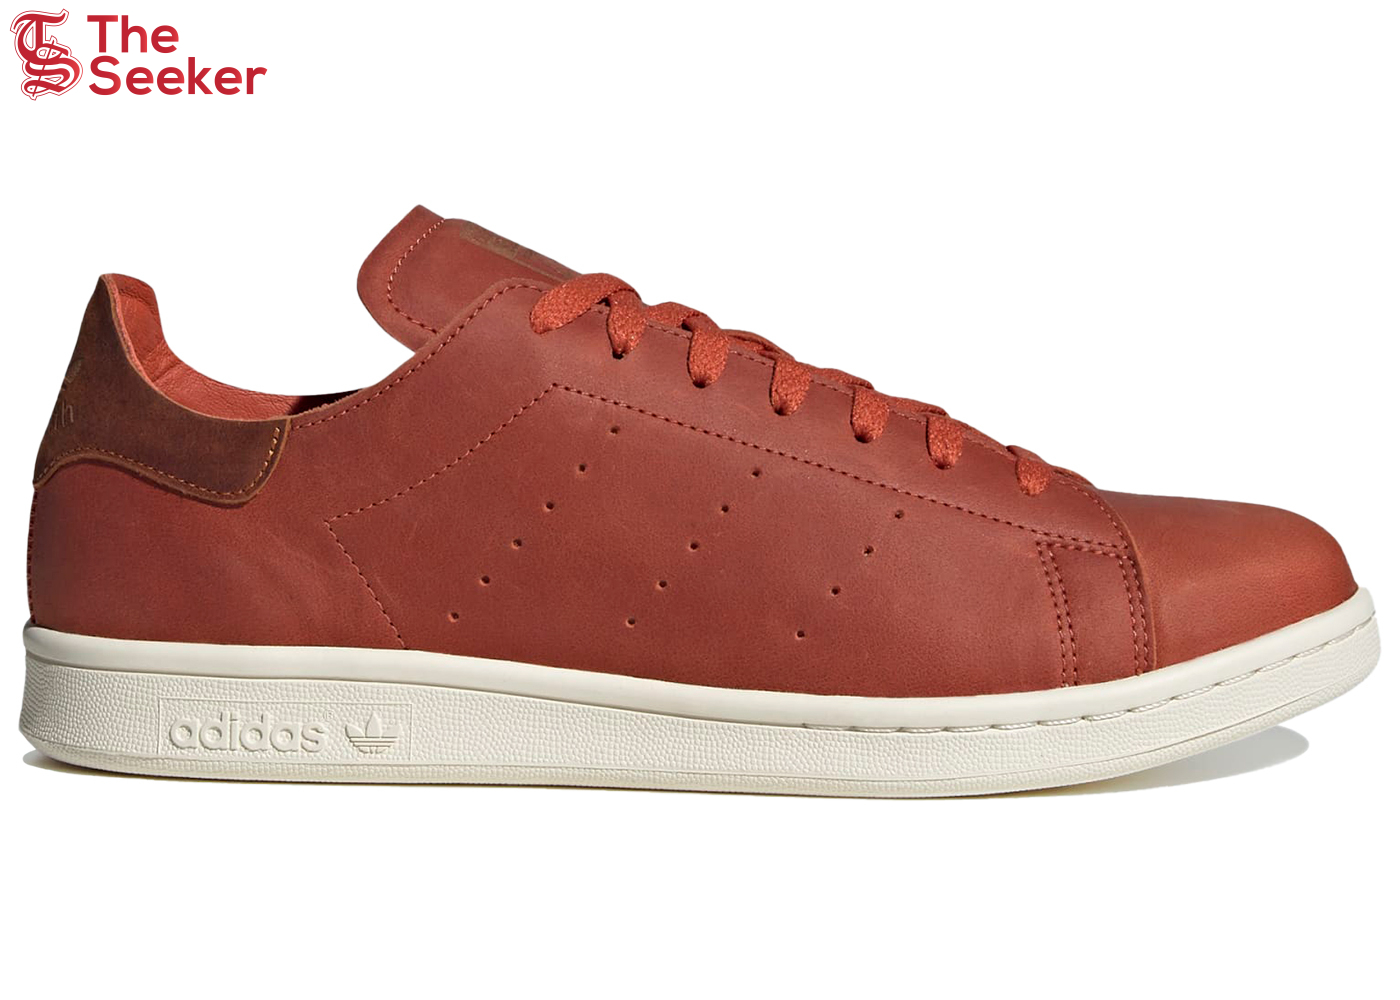 adidas Stan Smith Recon Surf Red